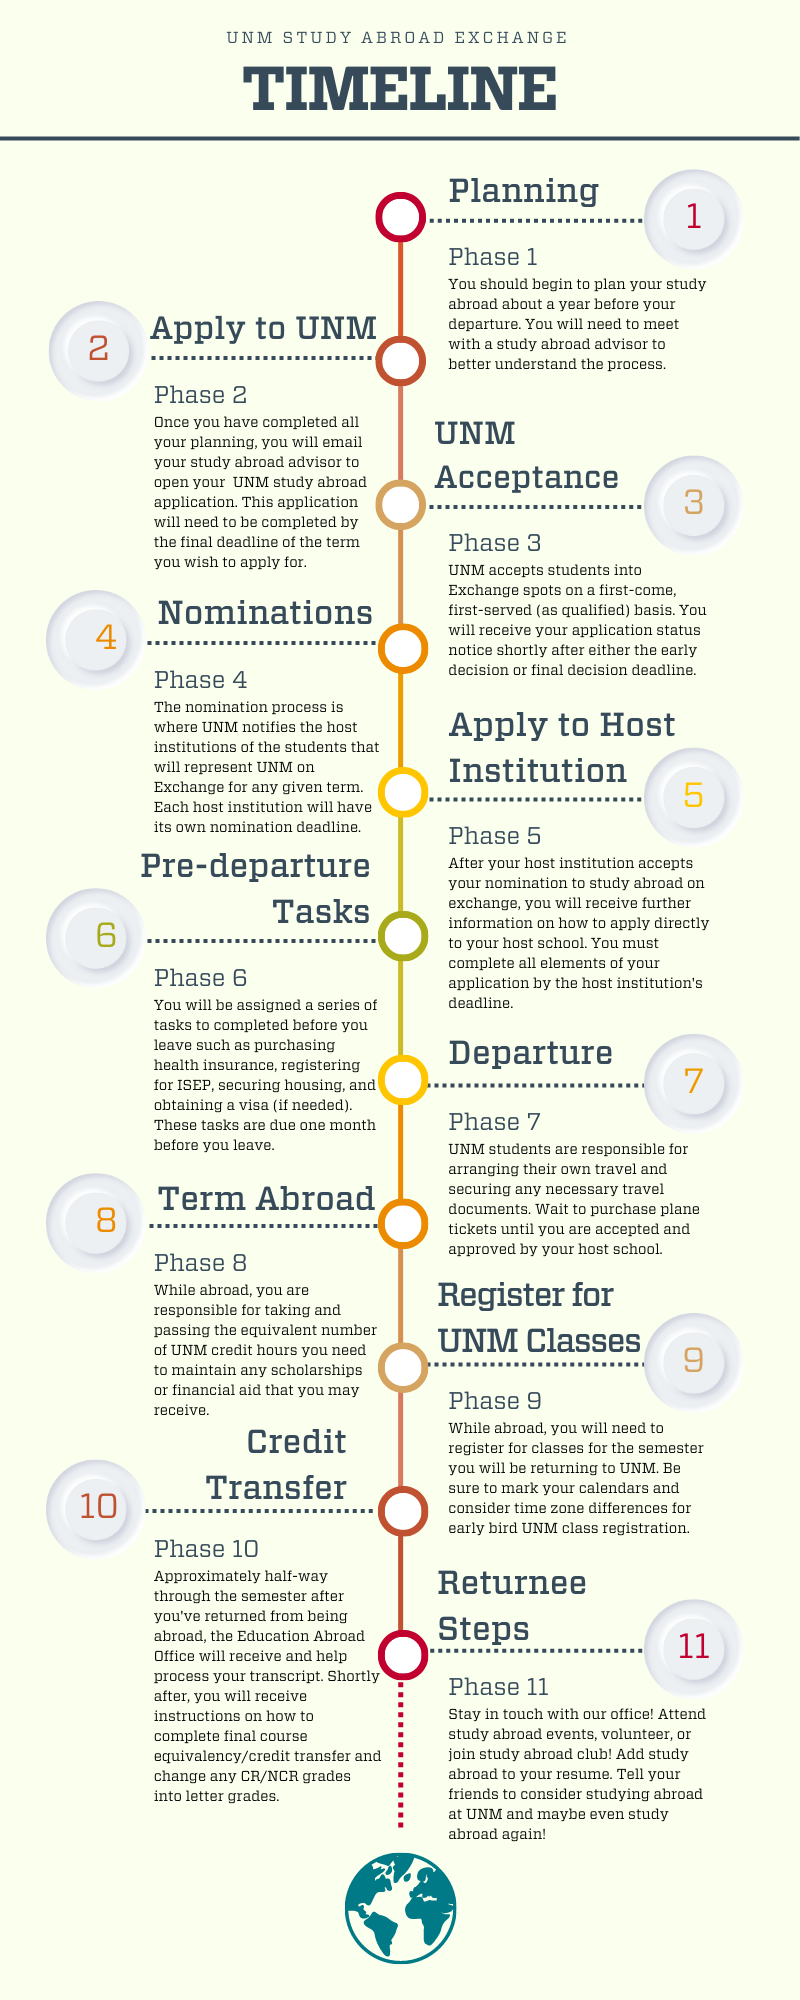 study-abroad-exchange-timeline-infographic.png